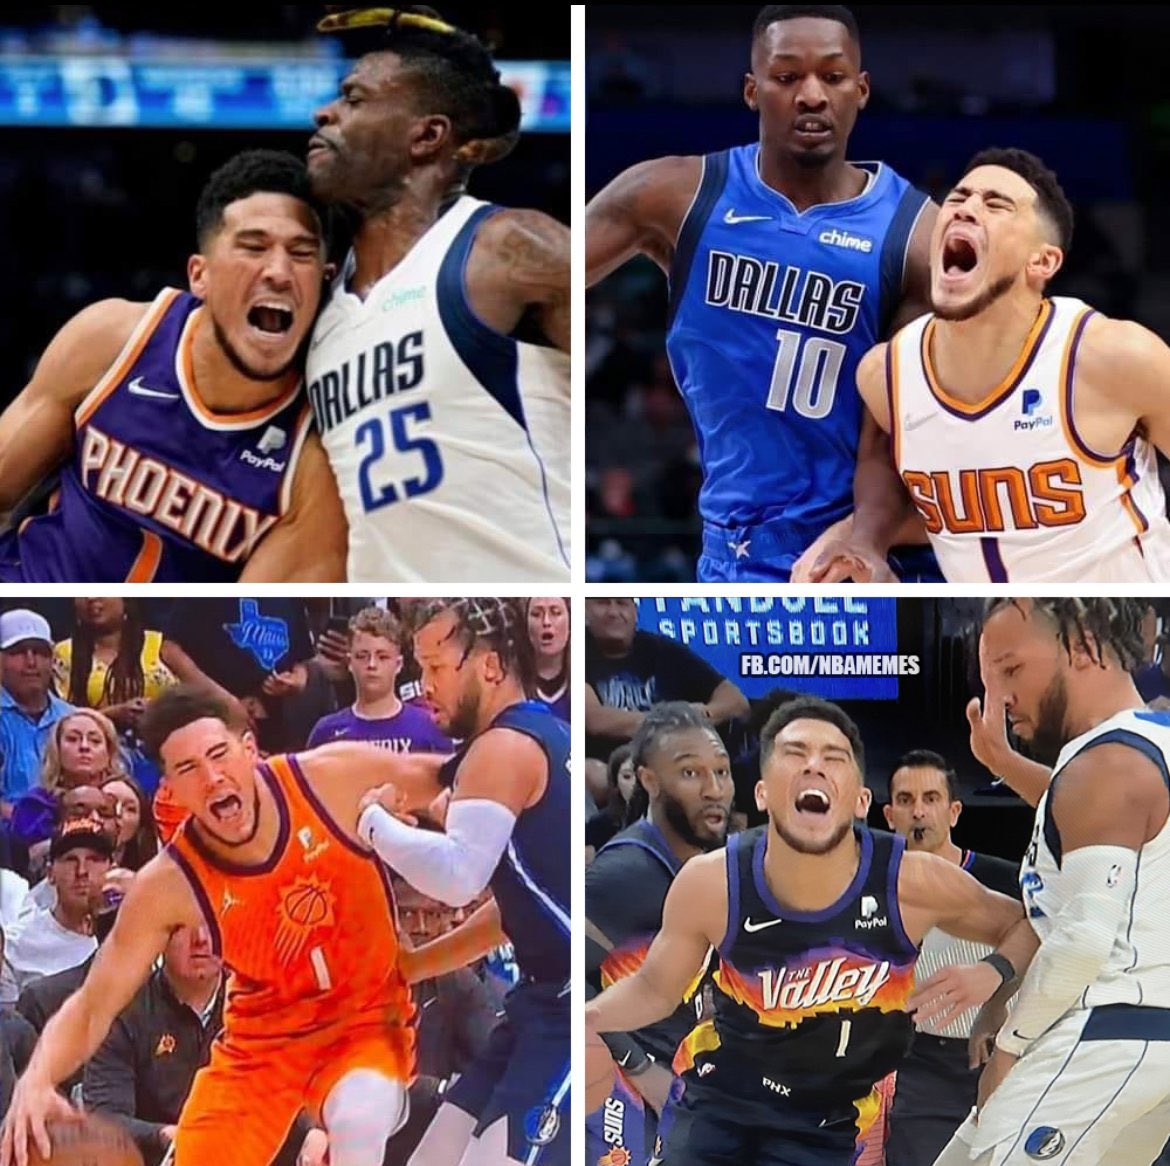 Quarterbacks who get smashed by a 240 lb linebacker don’t make this face. Batters who take a 99 mph fastball to their body don’t make this face. Devin Booker isn’t just a bitch in his sport. He’s a complete bitch of a man. He has no self respect. He’s a coward. A shit human being